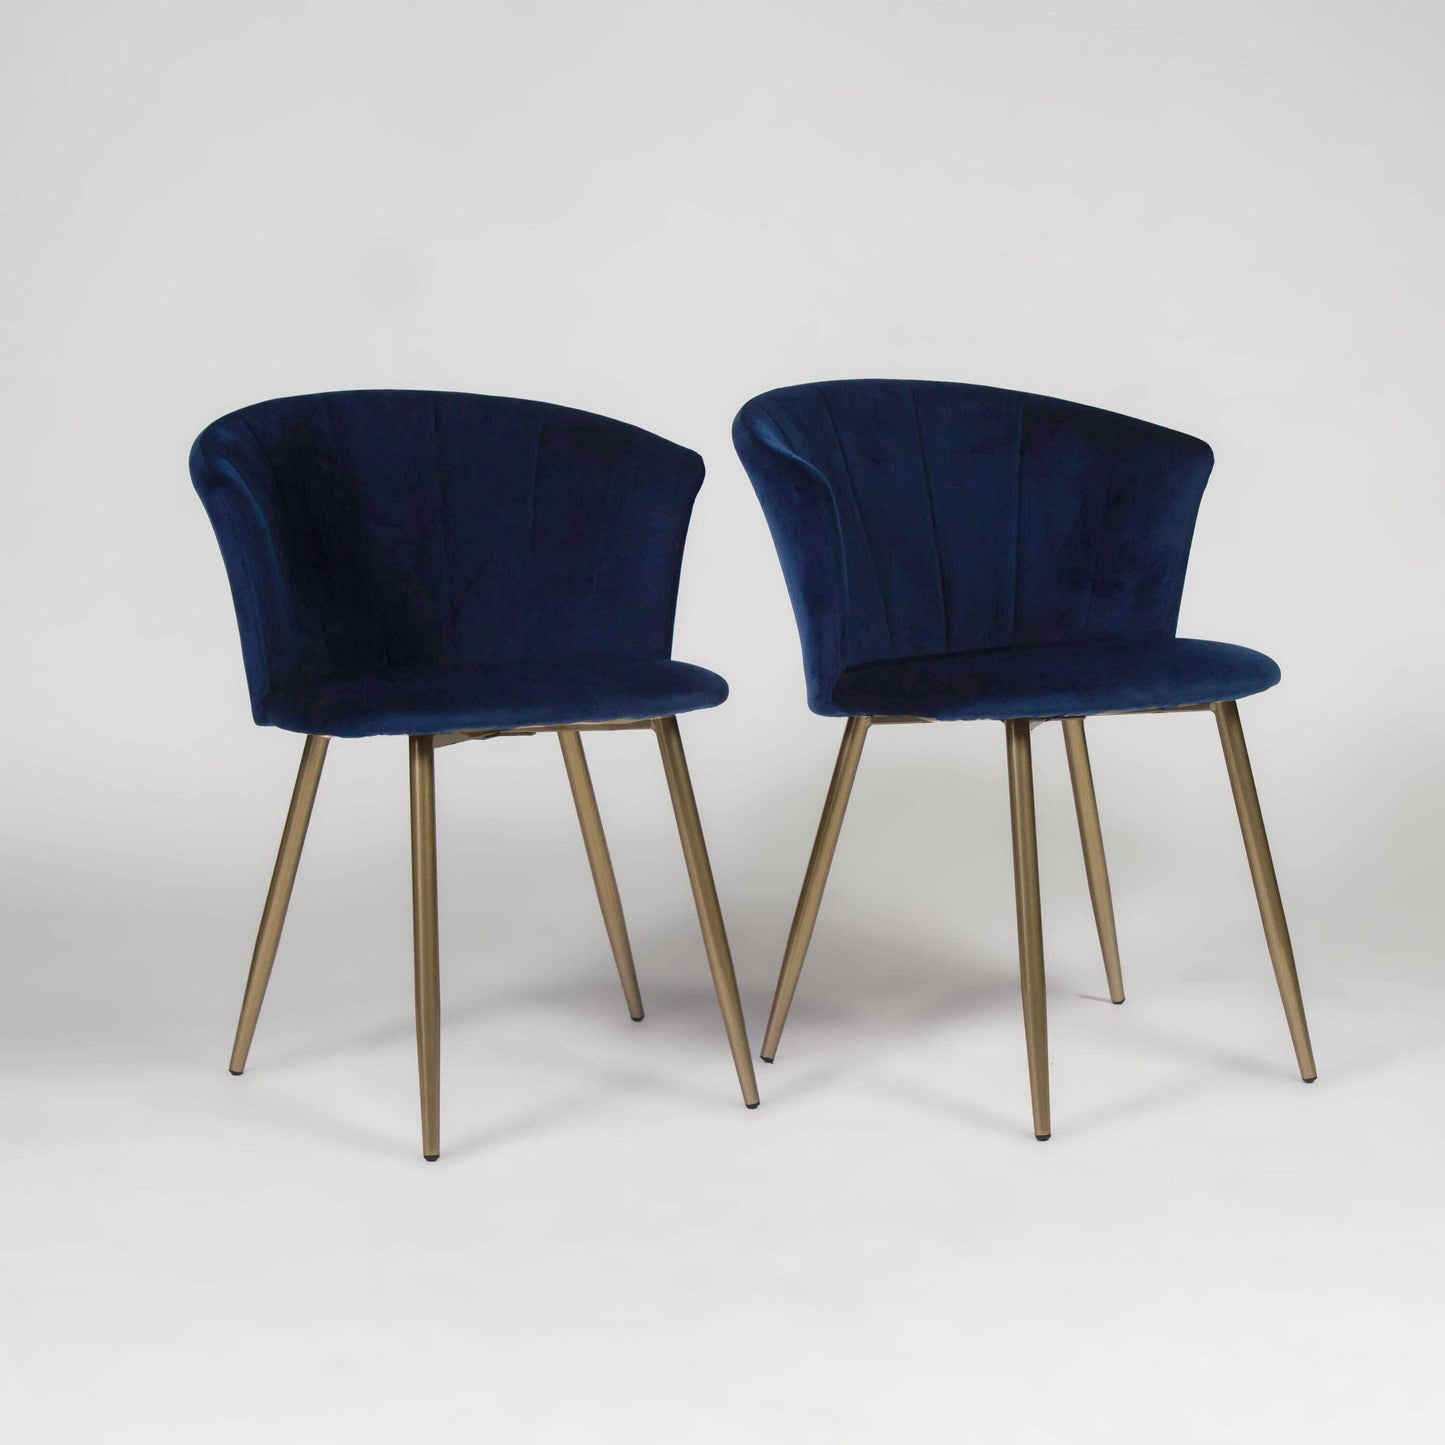 Cleo dining chairs - set of 2 - blue and gold - Laura James